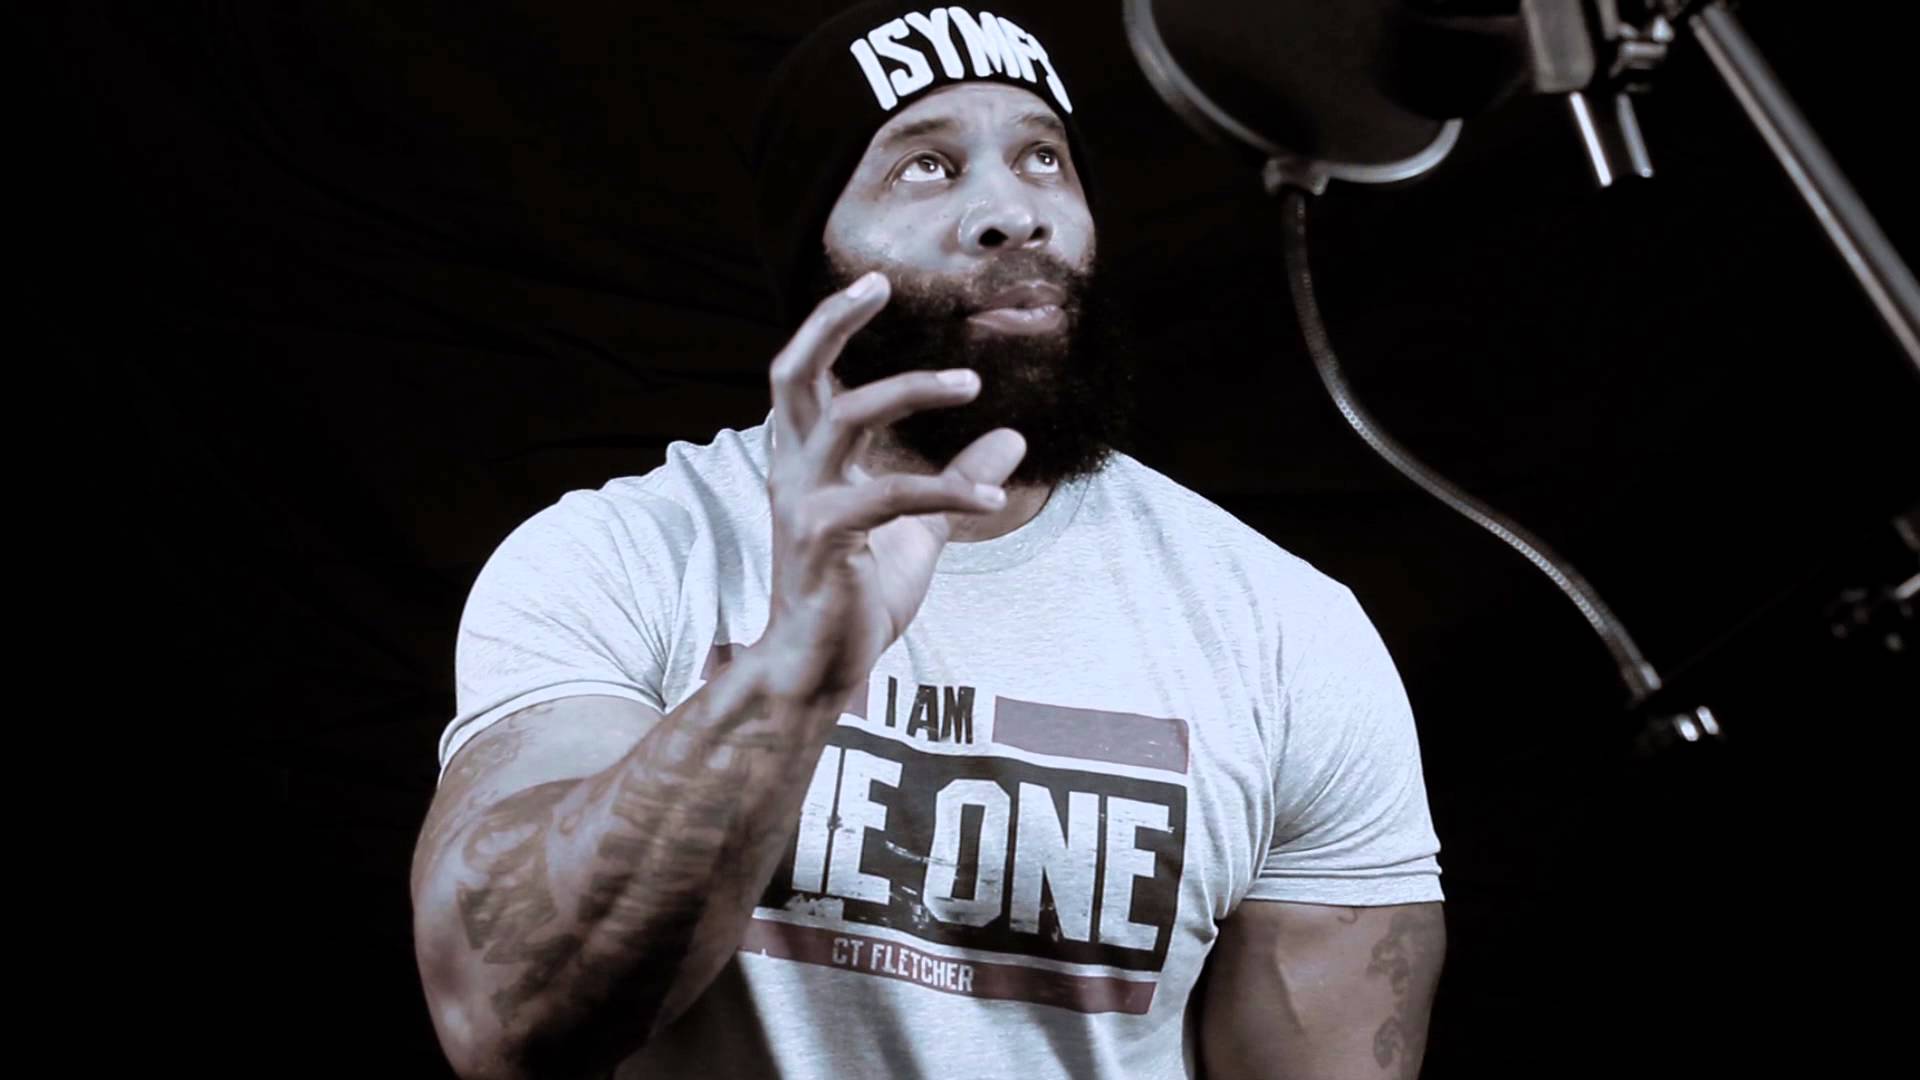 CT Fletcher Backgrounds Free Download